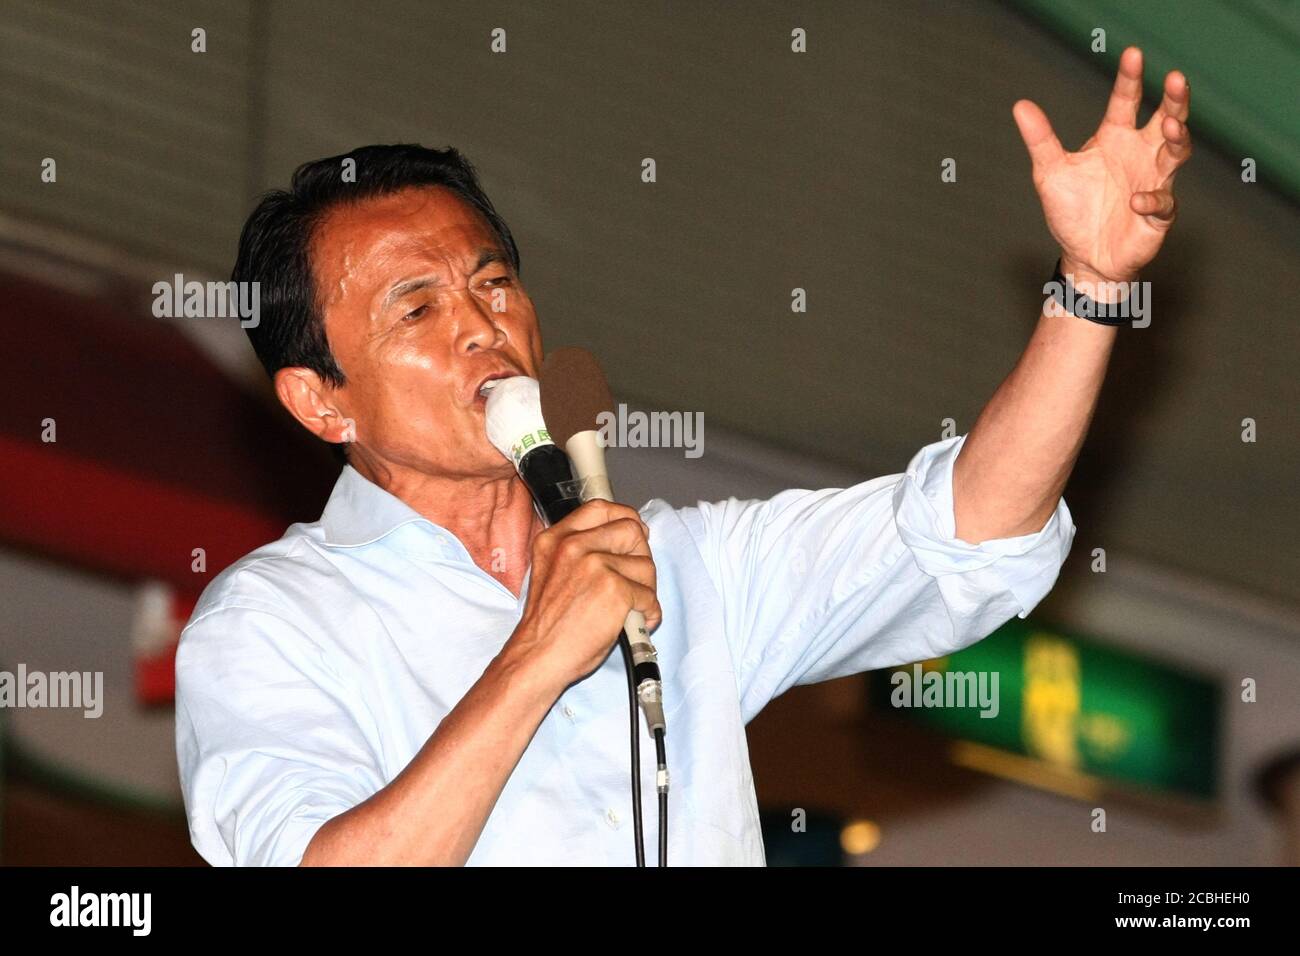 Taro Aso, leader of the Liberal Democratic Party gives a speech in Tokyo.  The Japanese newspaper reports that the Liberal Democratic Party loses member of the House of Representatives election to the Democratic Party. Stock Photo